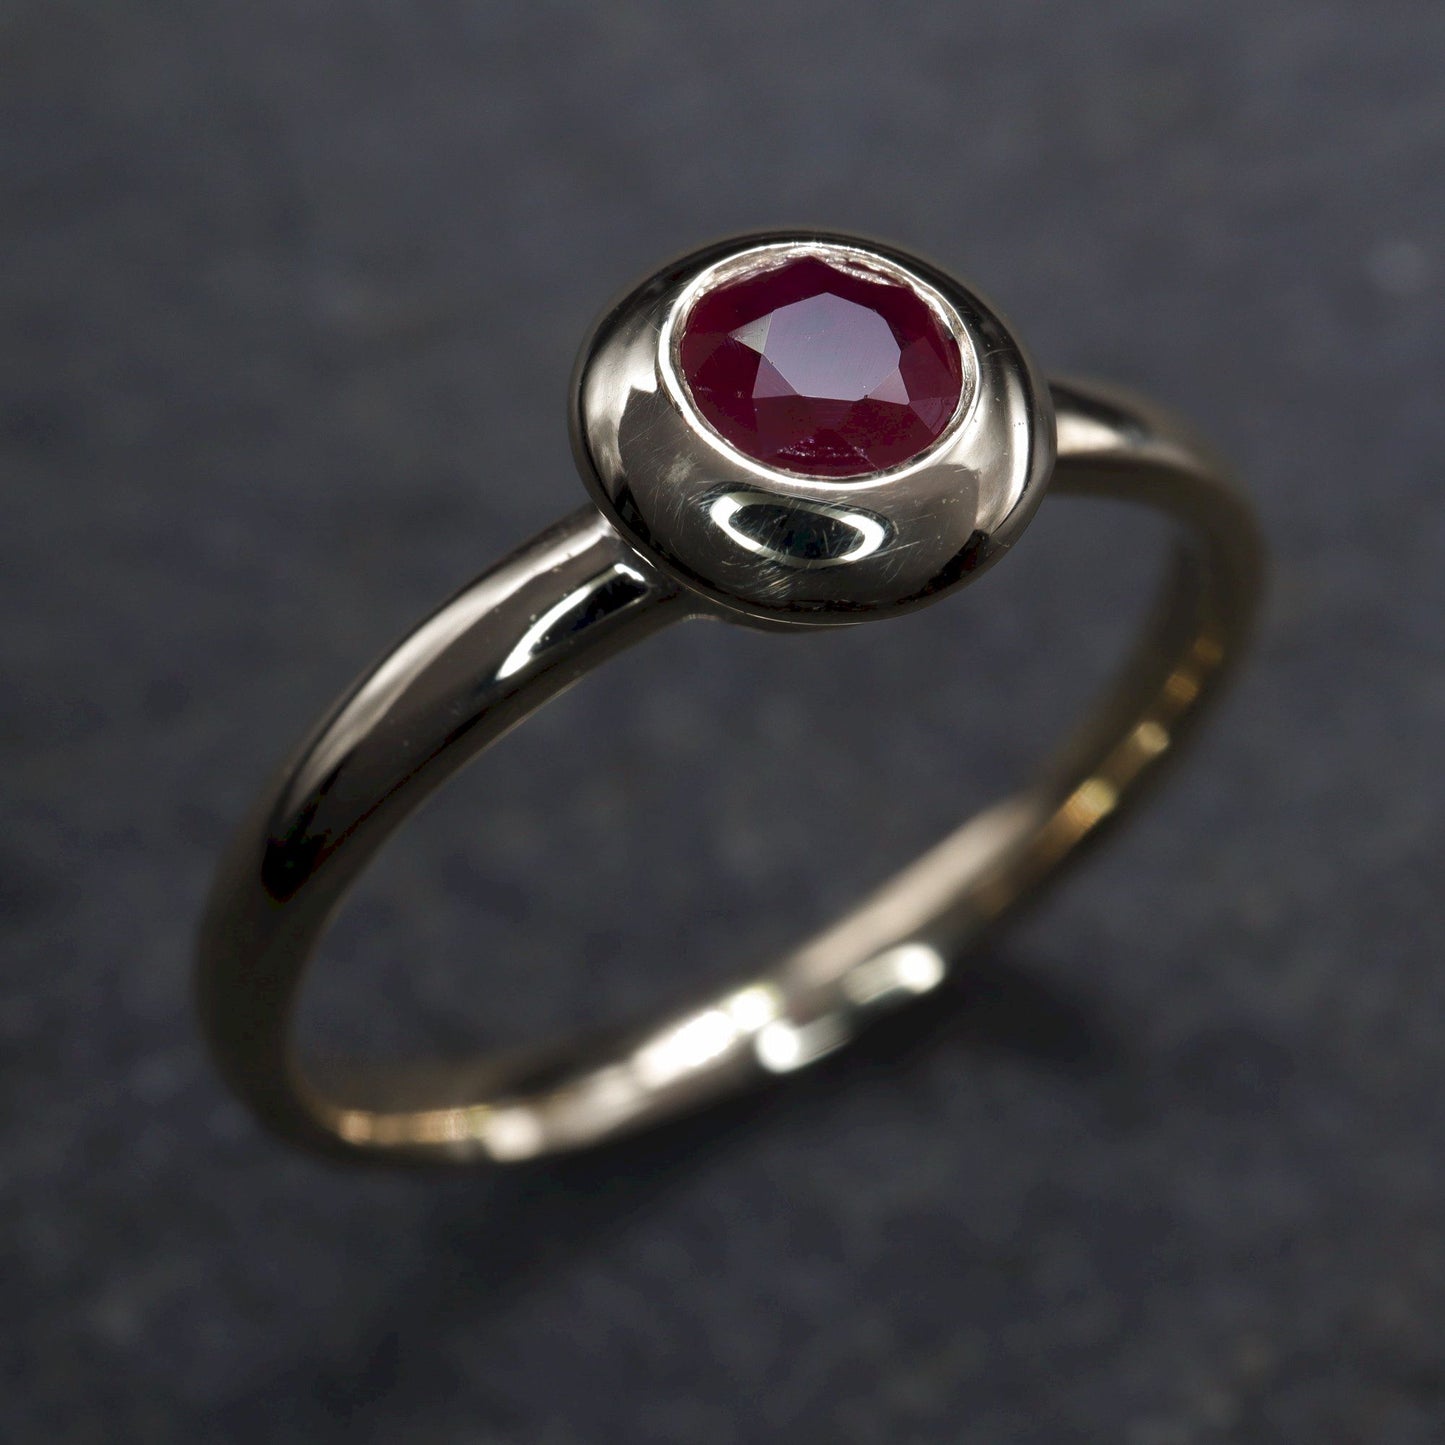 Solitaire fine Ruby engagement ring in yellow gold.